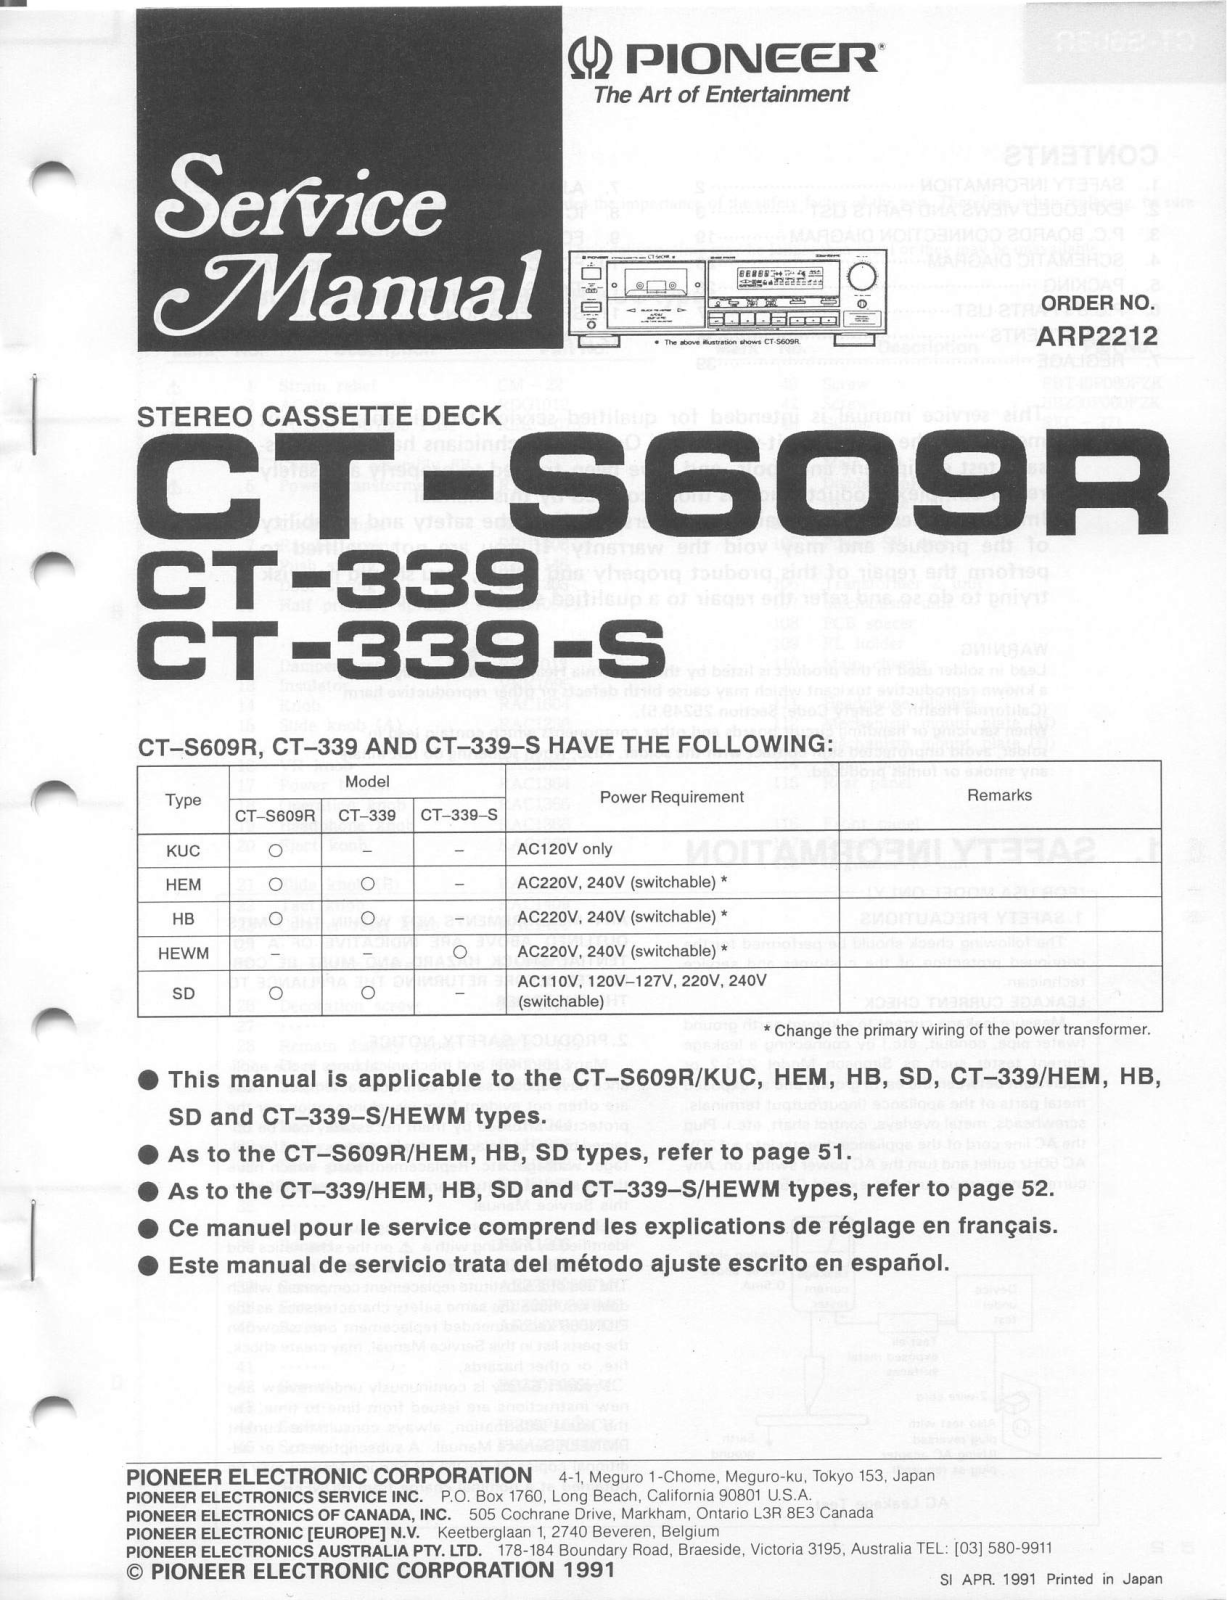 Pioneer CT-339, CT-339-S, CTS-609-R Service manual